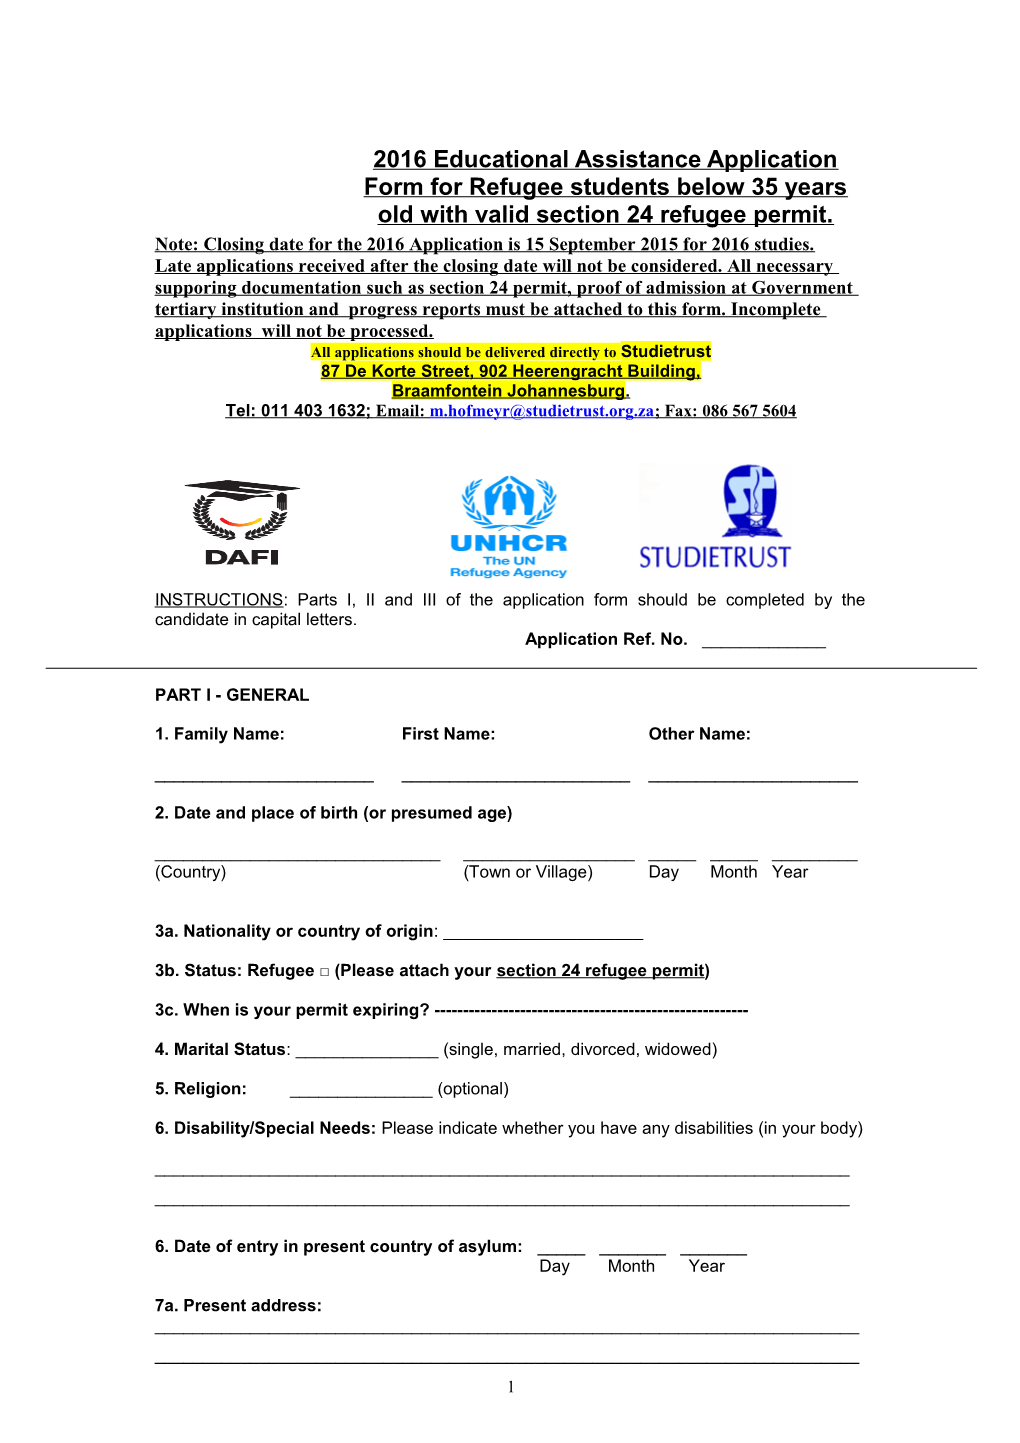 Application Form for Educational Assistance